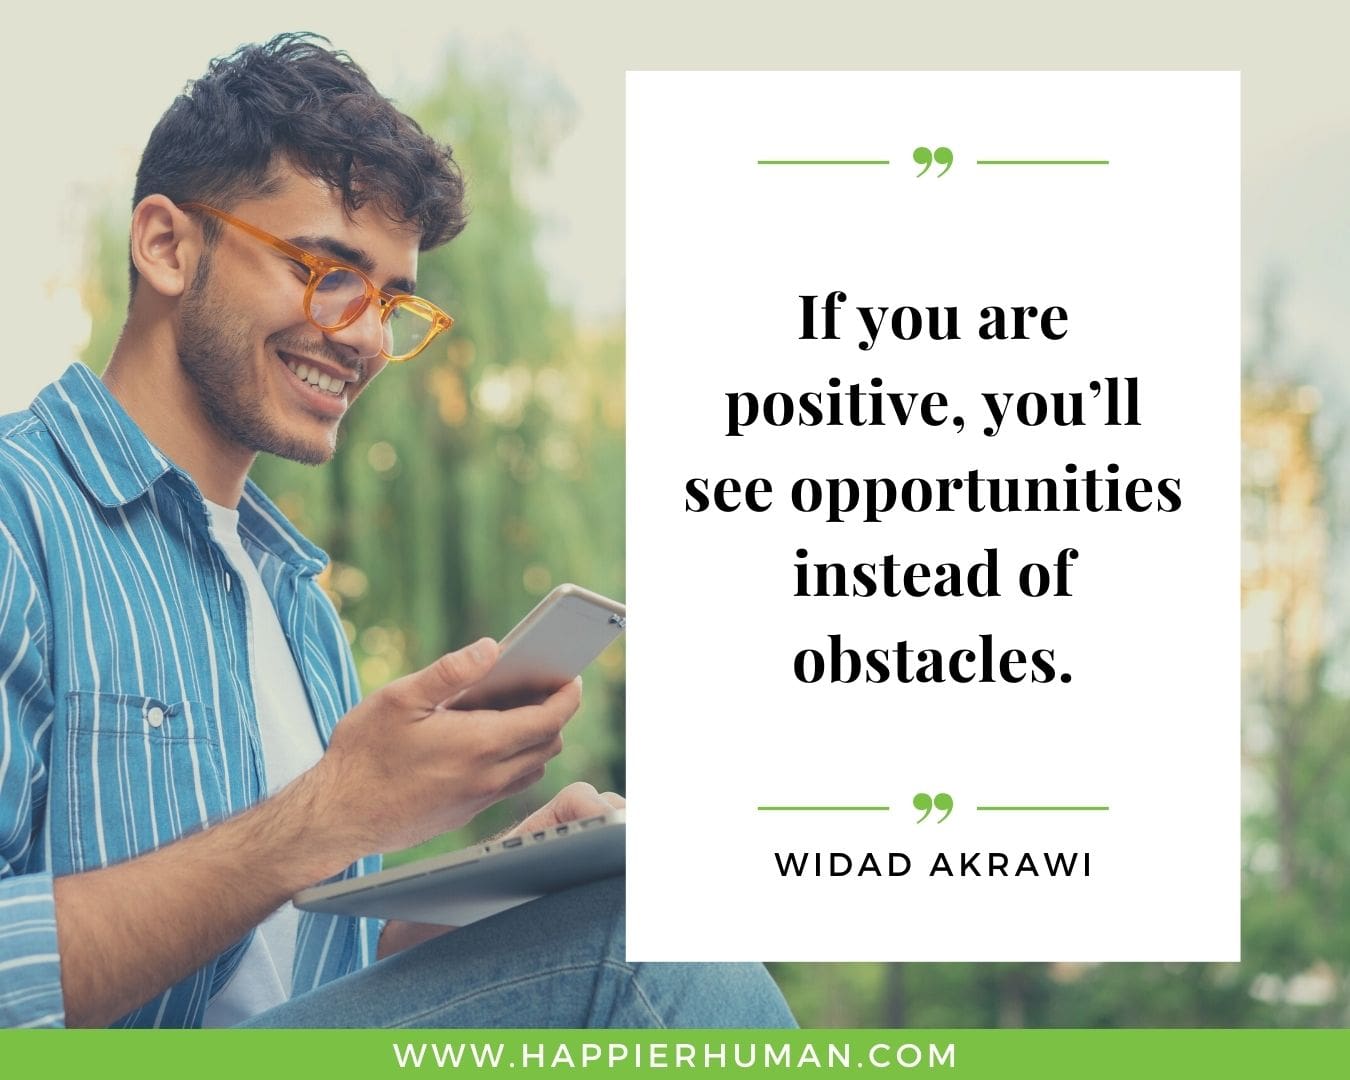 Positive Energy Quotes - “If you are positive, you’ll see opportunities instead of obstacles.” - Widad Akrawi